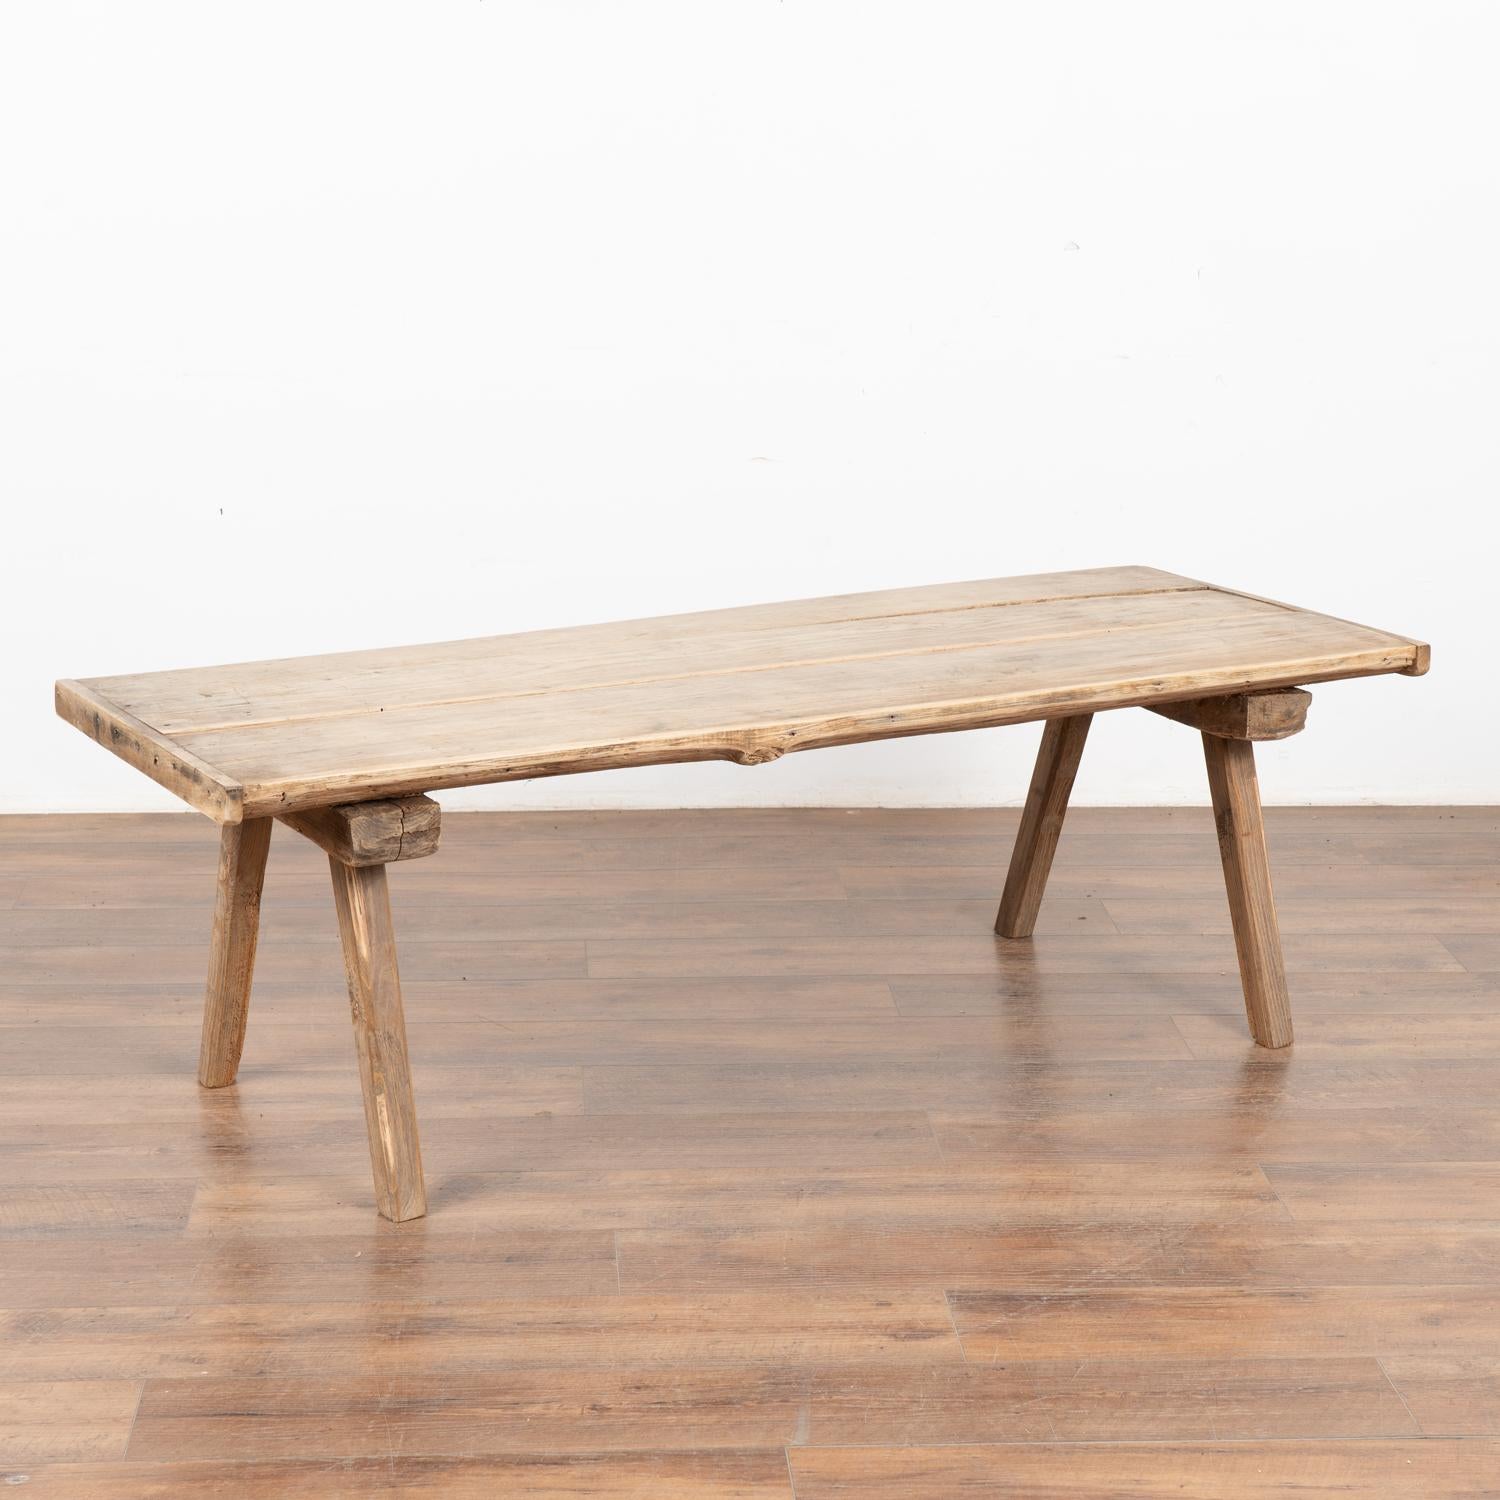 The appeal of this coffee table comes from the rustic wood top that originally served as a work table and rests on original thick peg legs. 
The many scratches, nicks, gouges, stains, old cracks and imperfections that all combine to build the depth